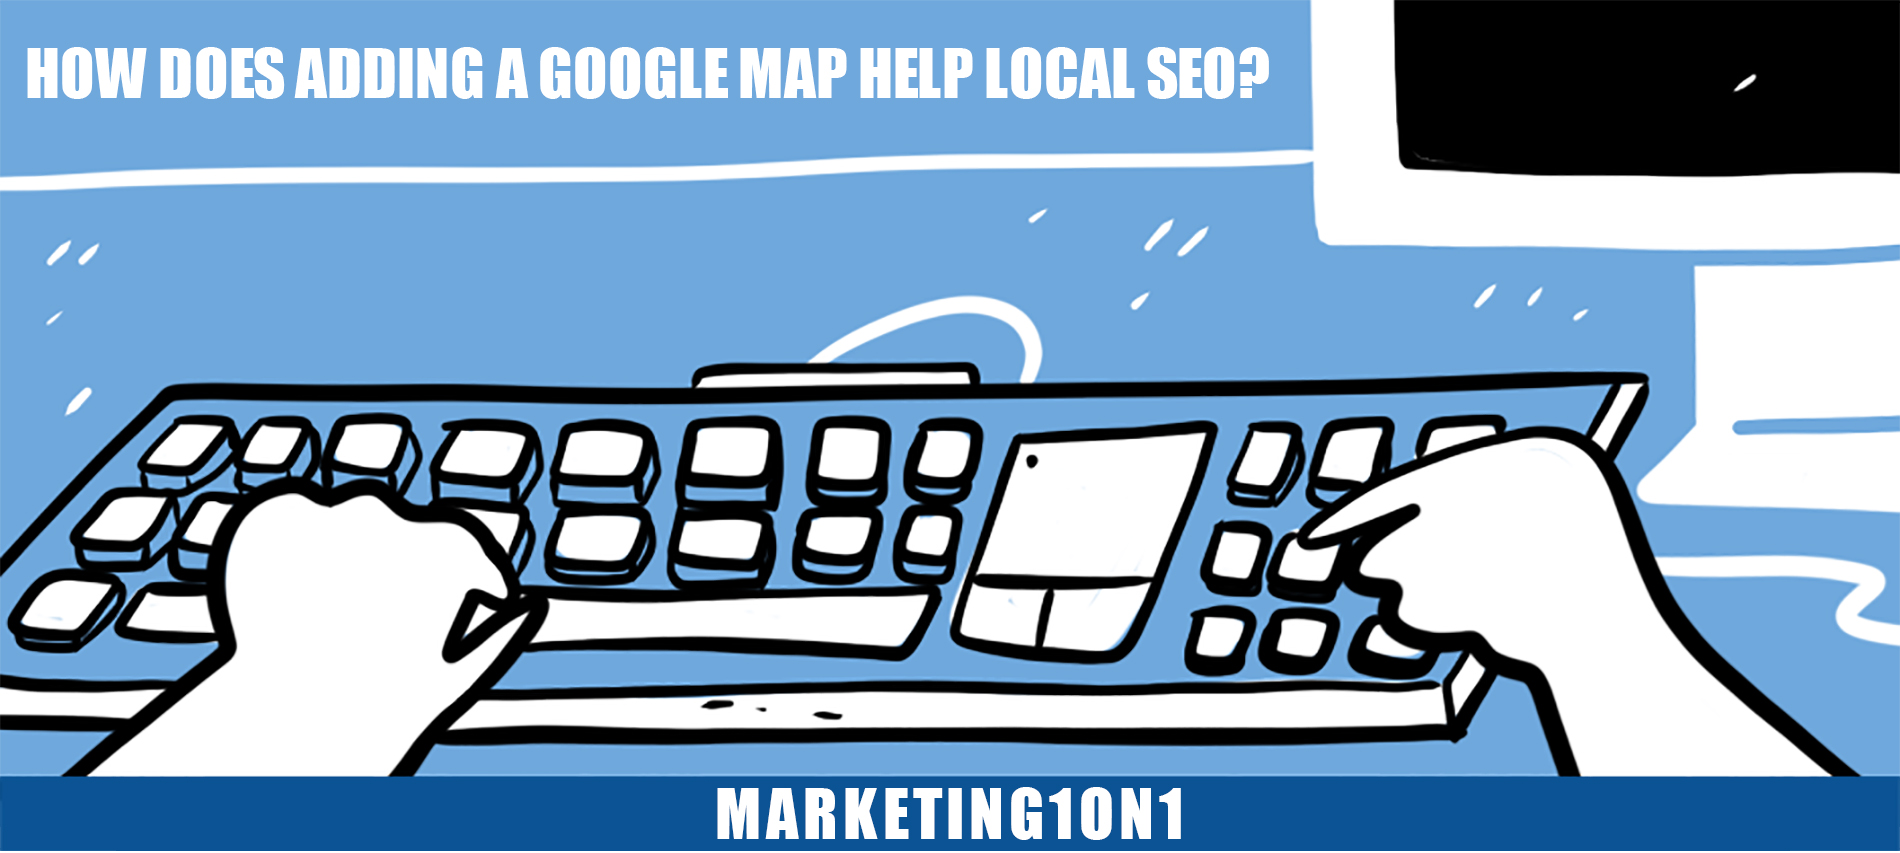 How does adding a google map help local SEO?